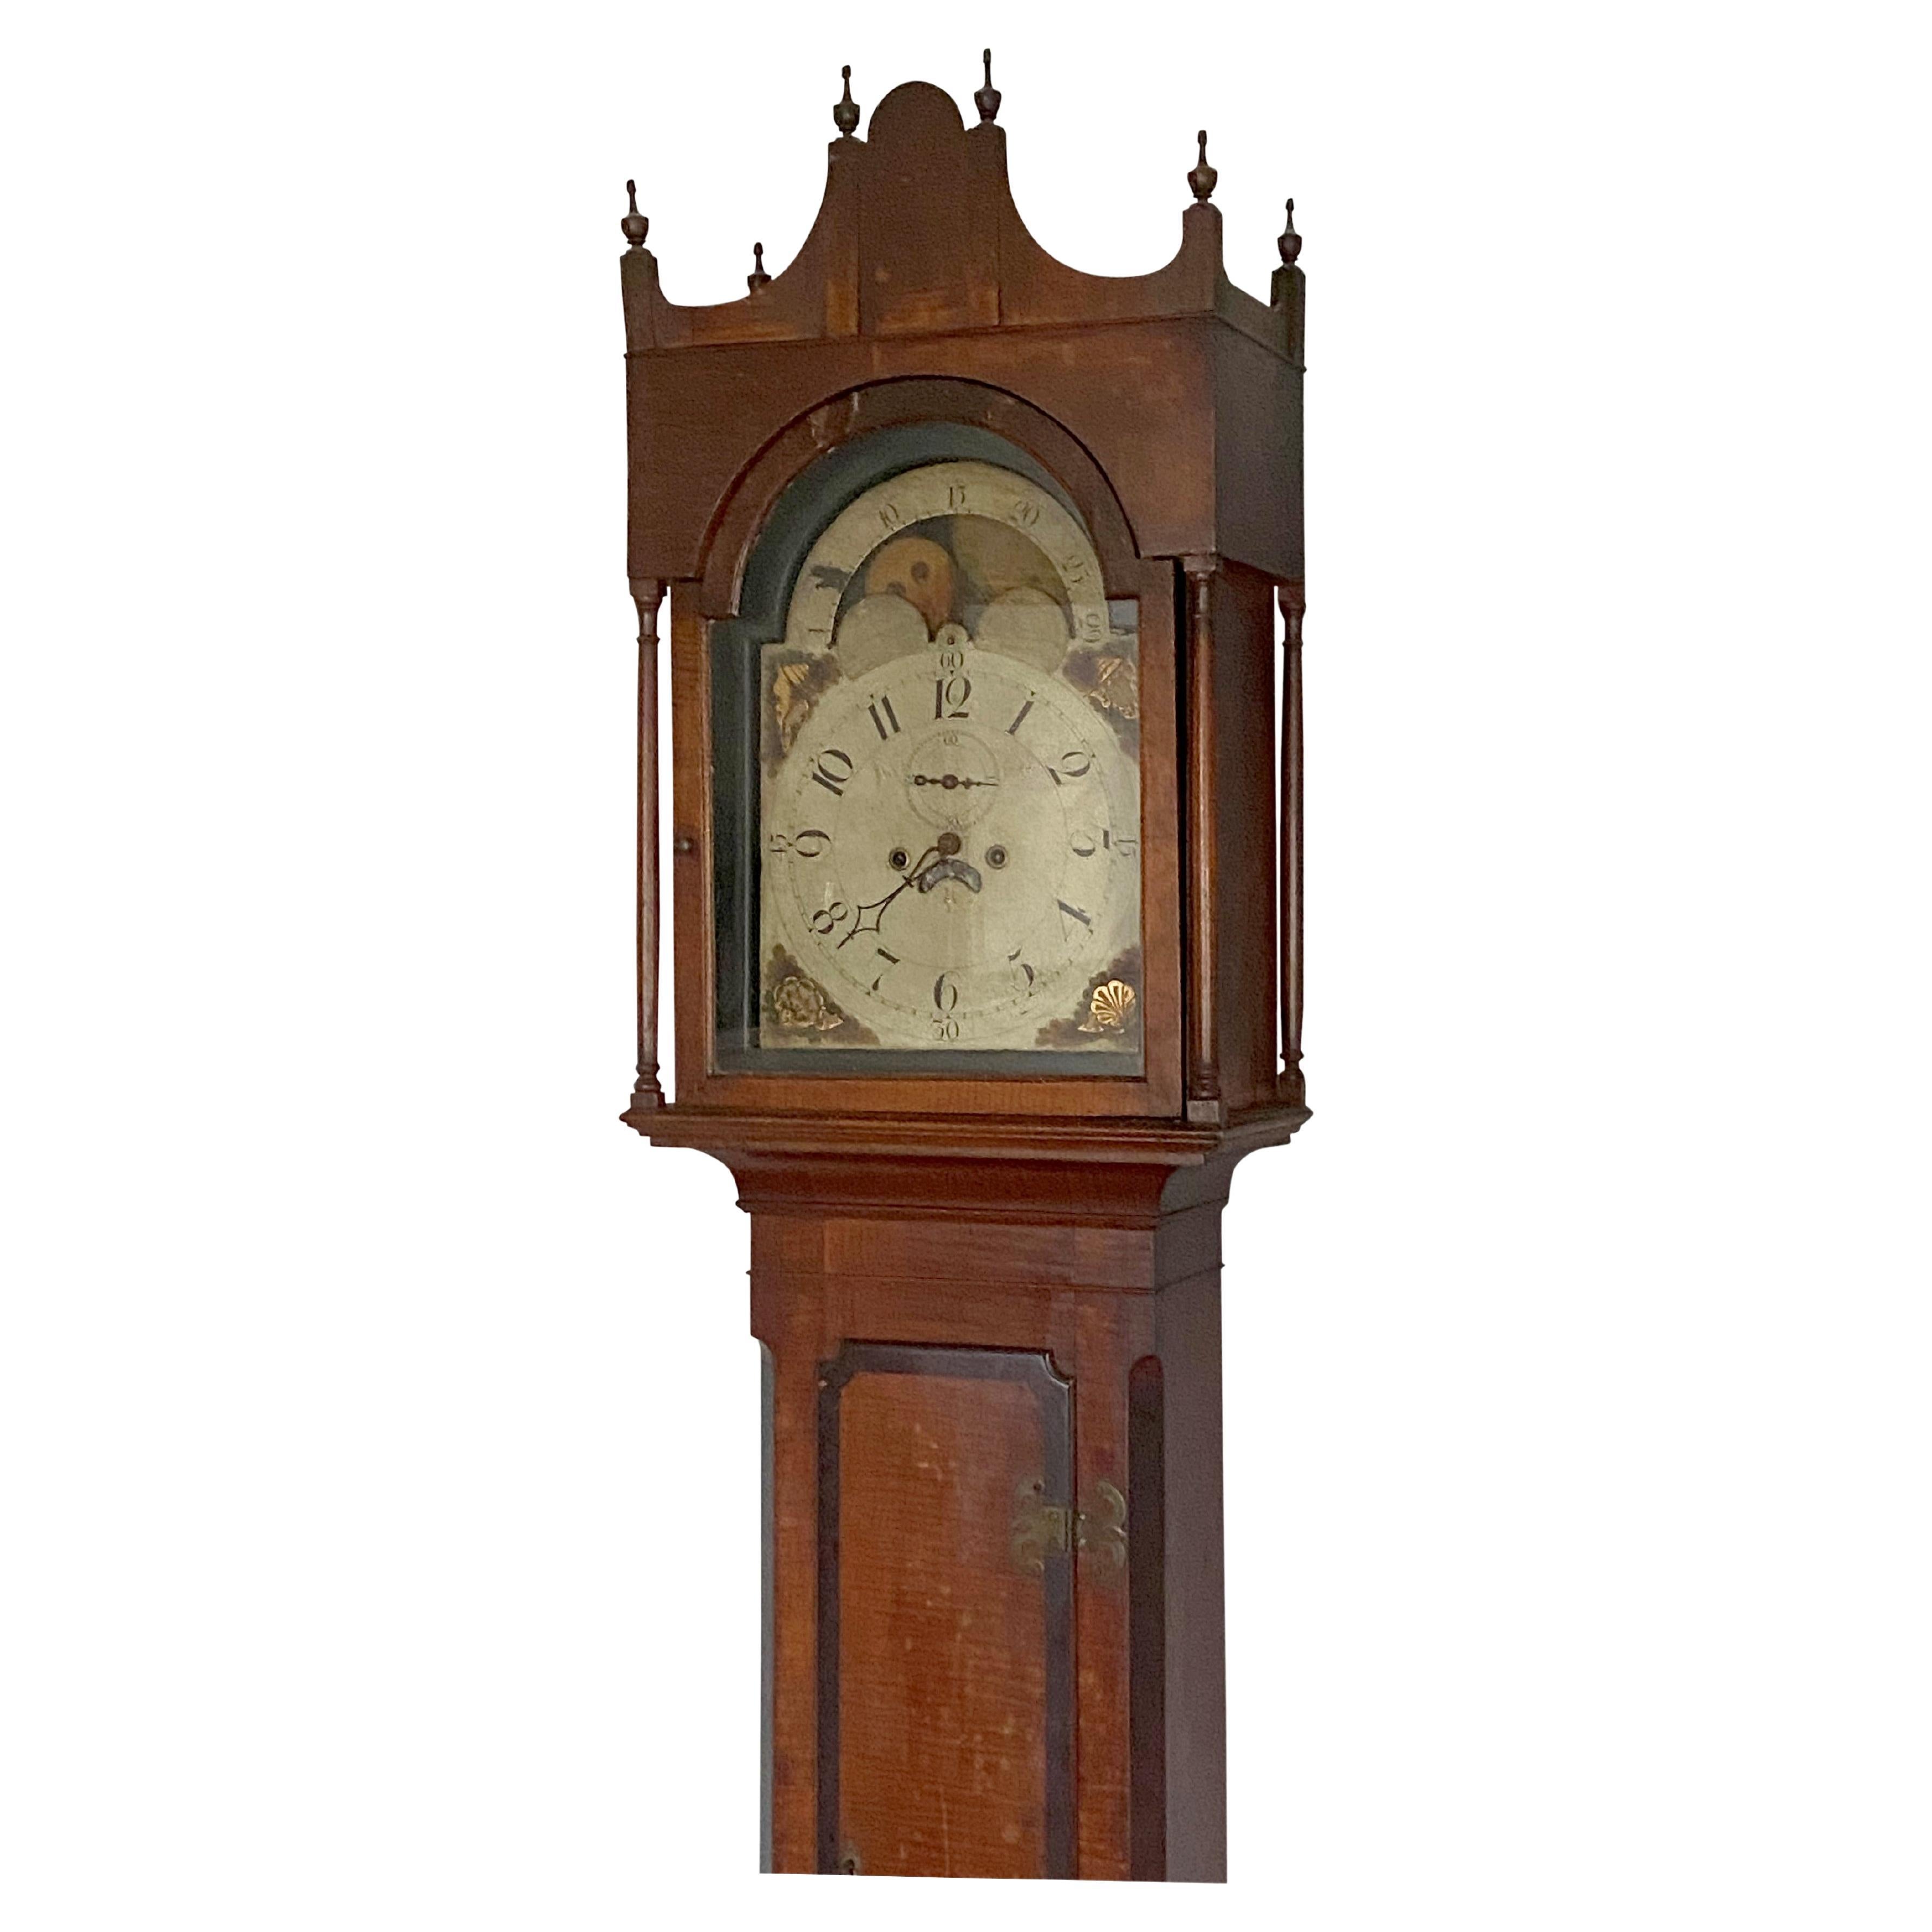 Distinctive federal curly maple tall case clock with mahogany banding, Pennsylvania, circa 1810. IN a remarkable state of preservation and with slender 'french' feet and original urn shaped finials. The 8 day two train movement has original dial and